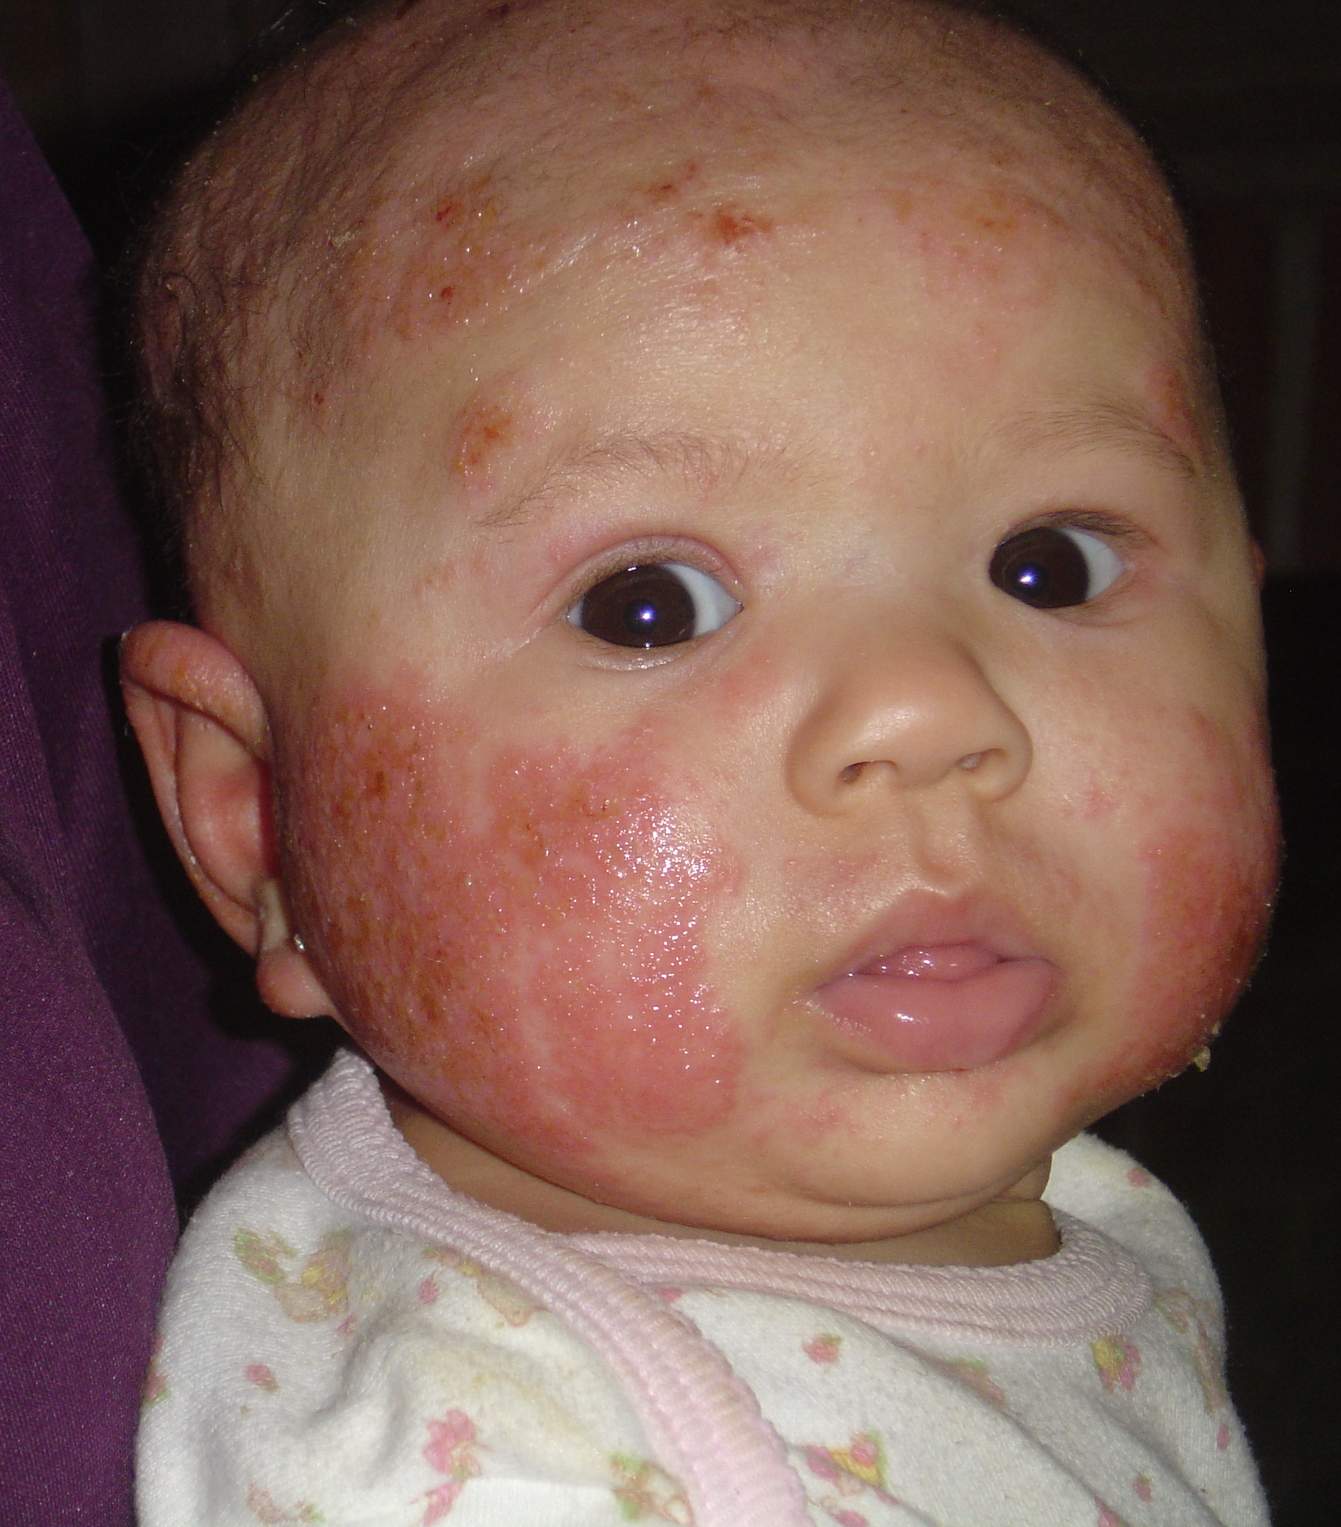 Allergies and neonatal acne baby